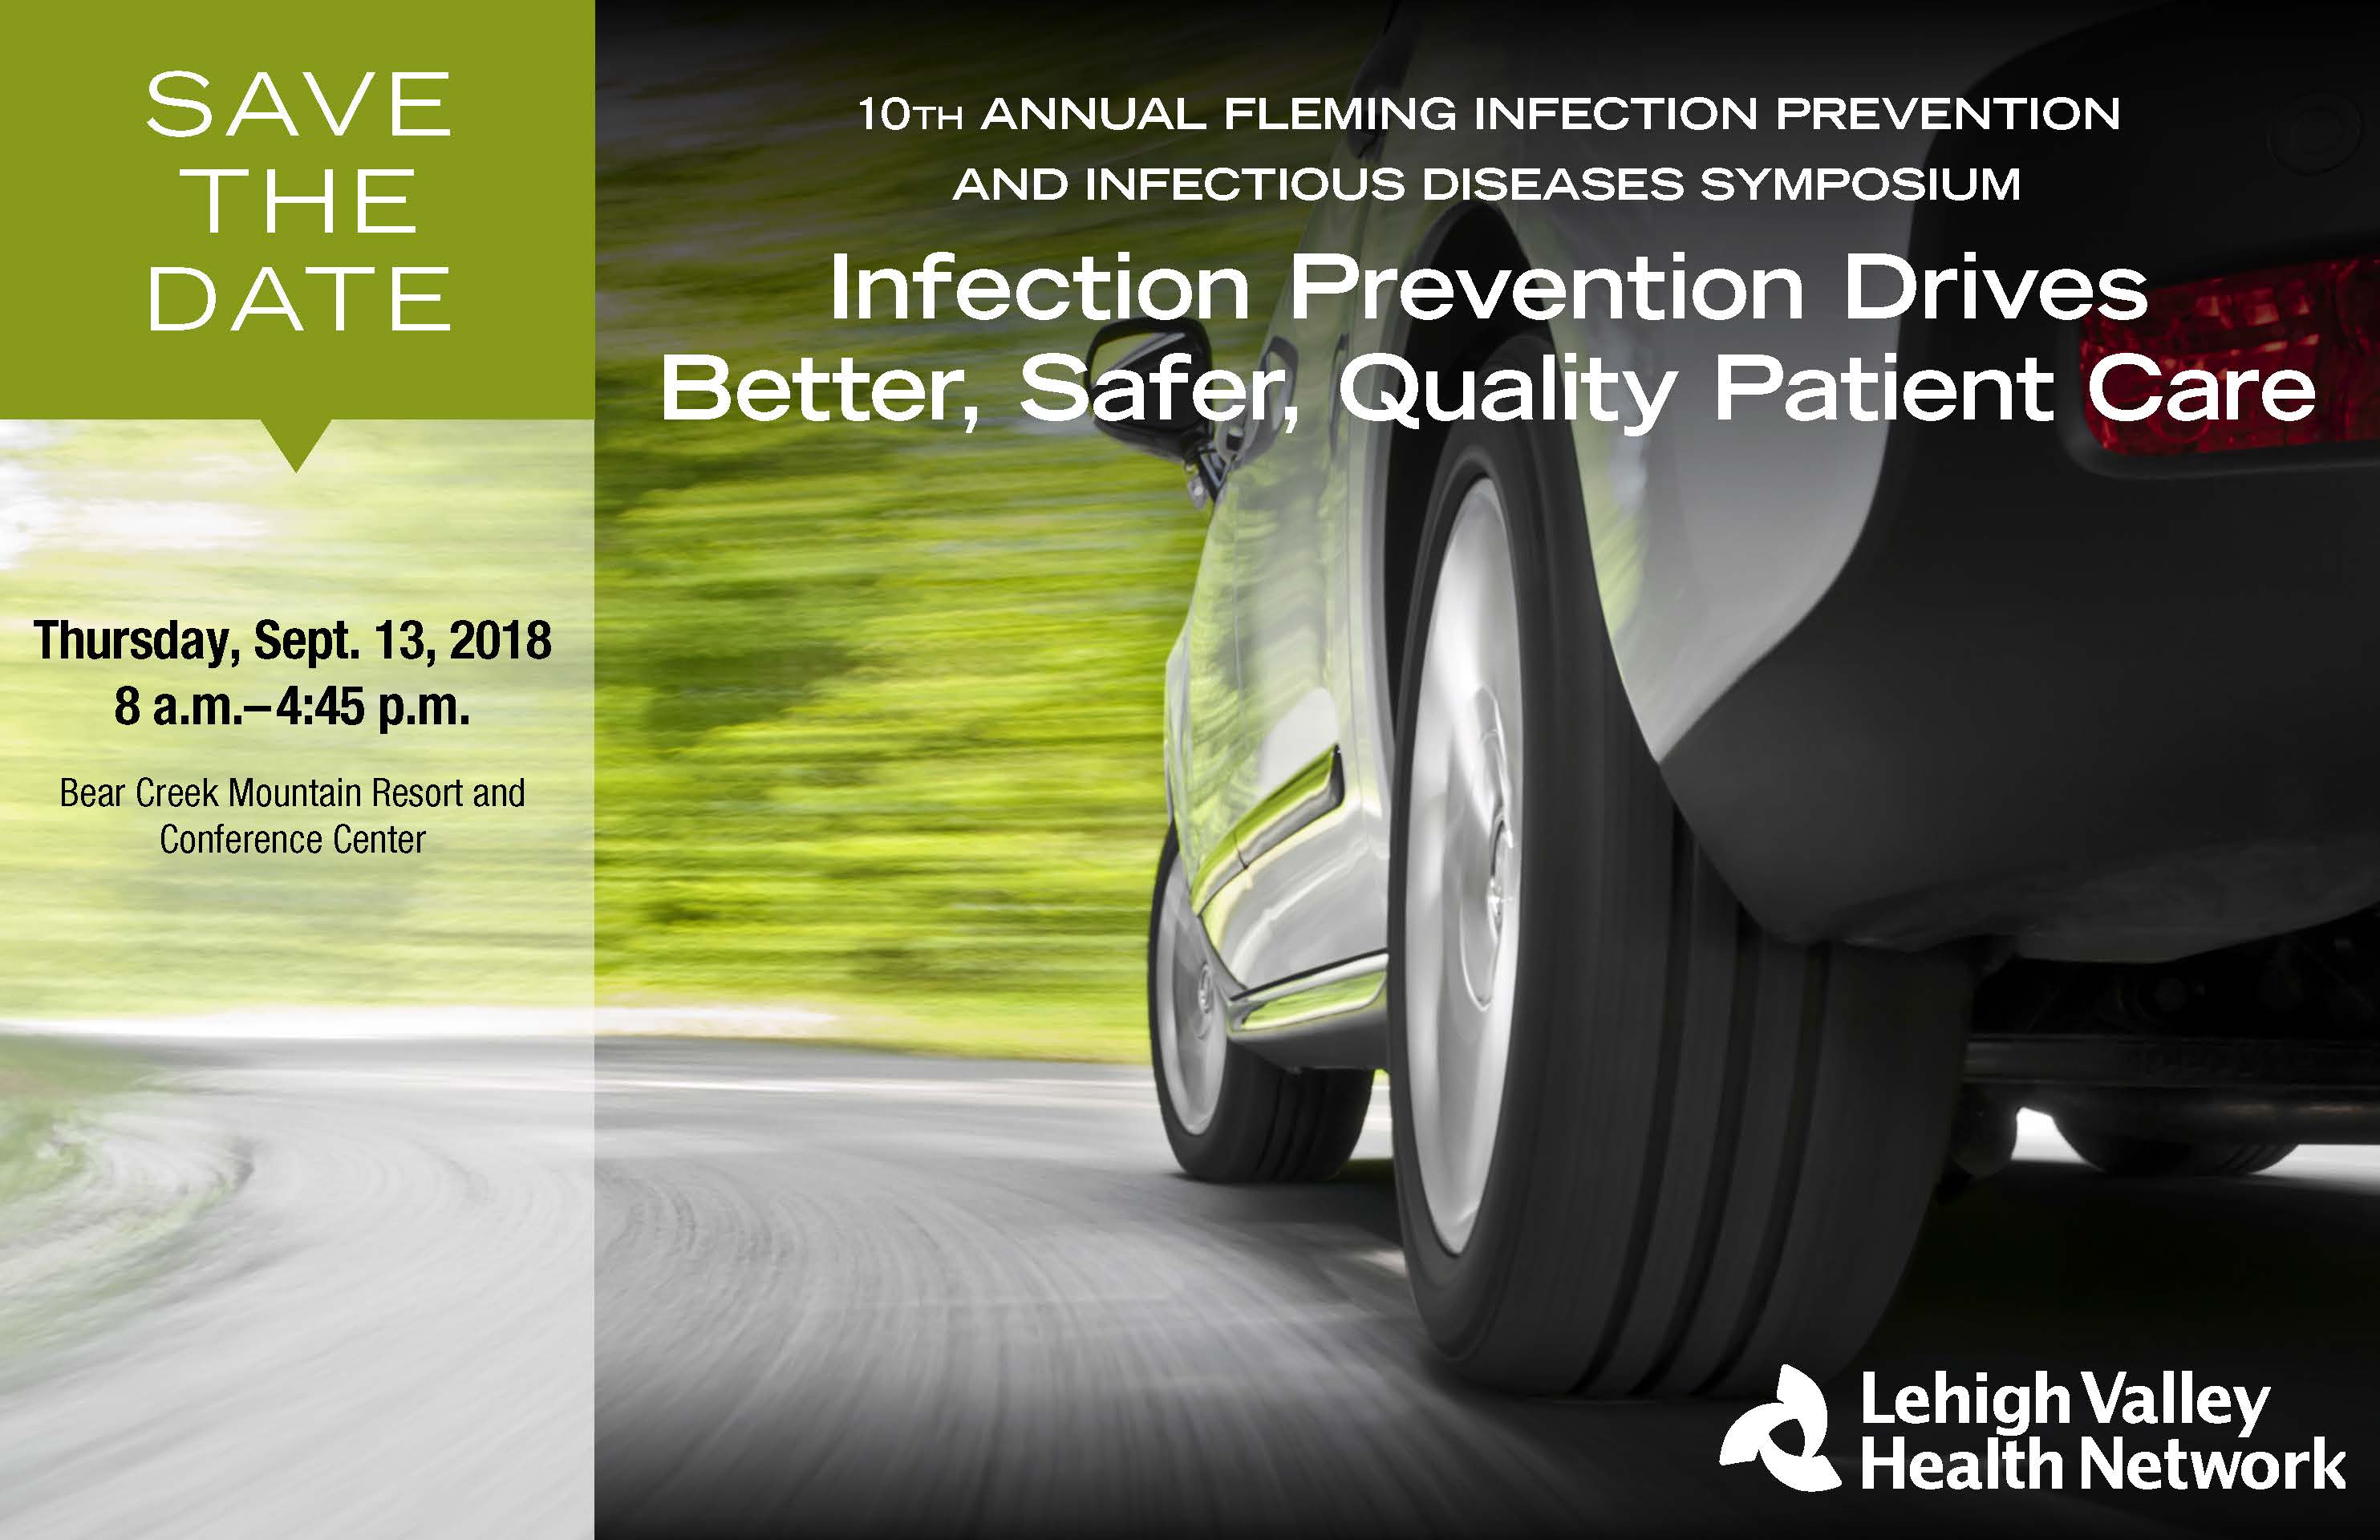 2018 10th Annual Fleming Infection Prevention and Infectious Diseases Symposium